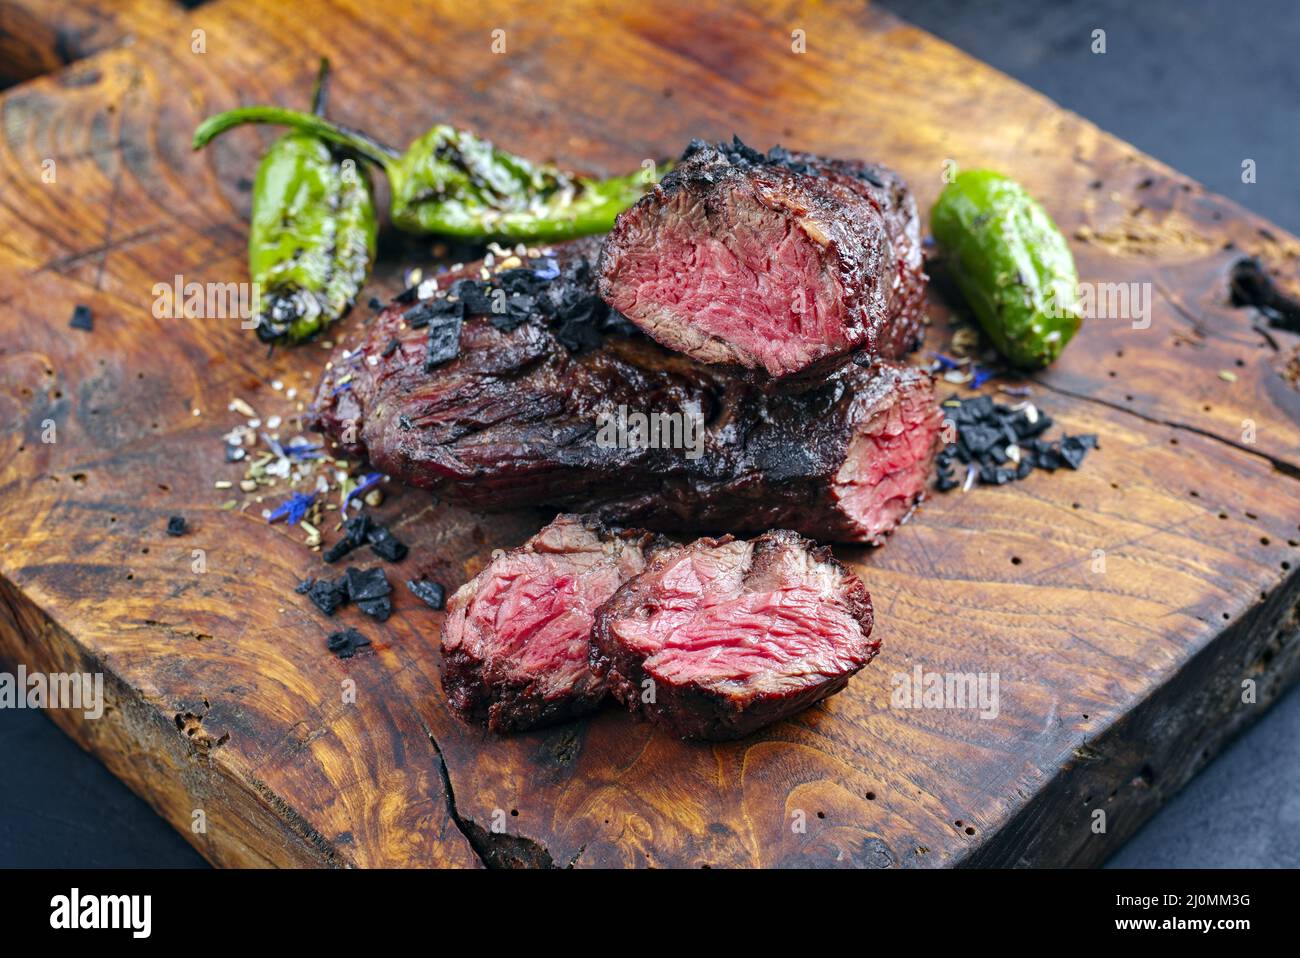 Traditional barbecue wagyu onglet steak with green chili and spices served as close-up on a rustic wooden board Stock Photo